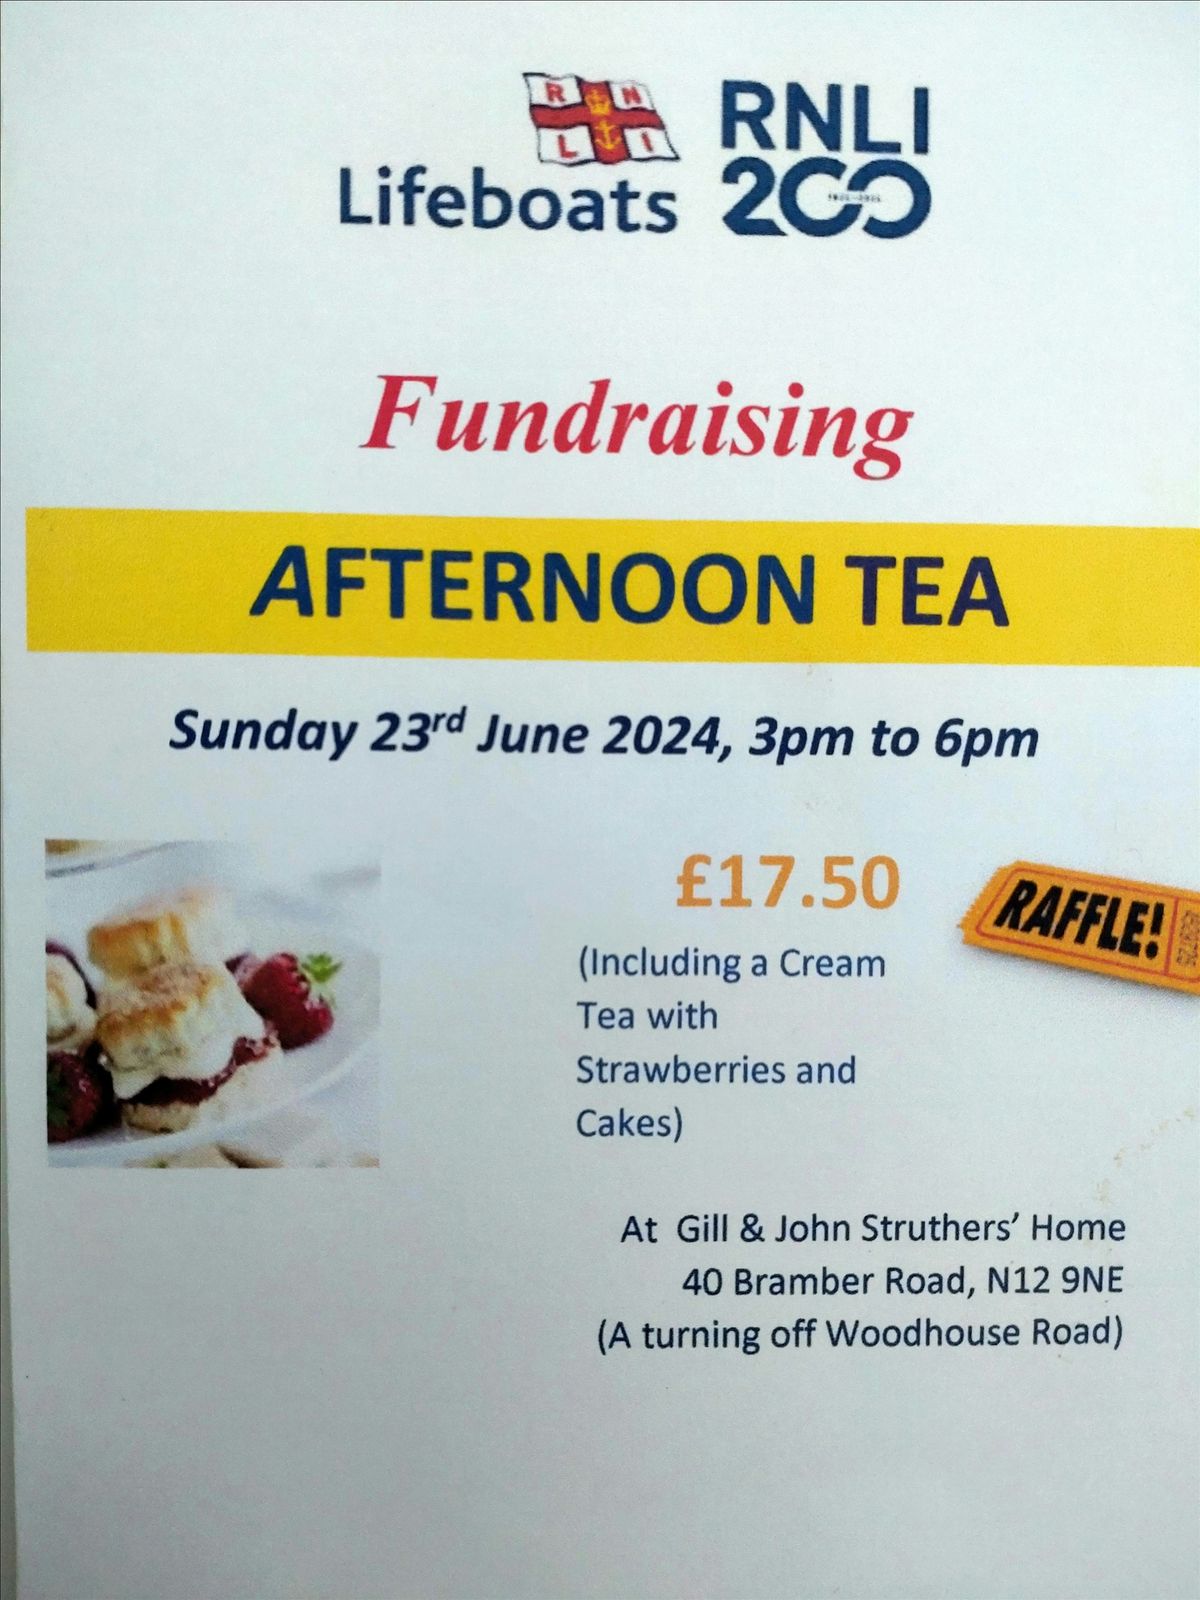 Lifeboats RNLI 200 Fundraising Afternoon Tea